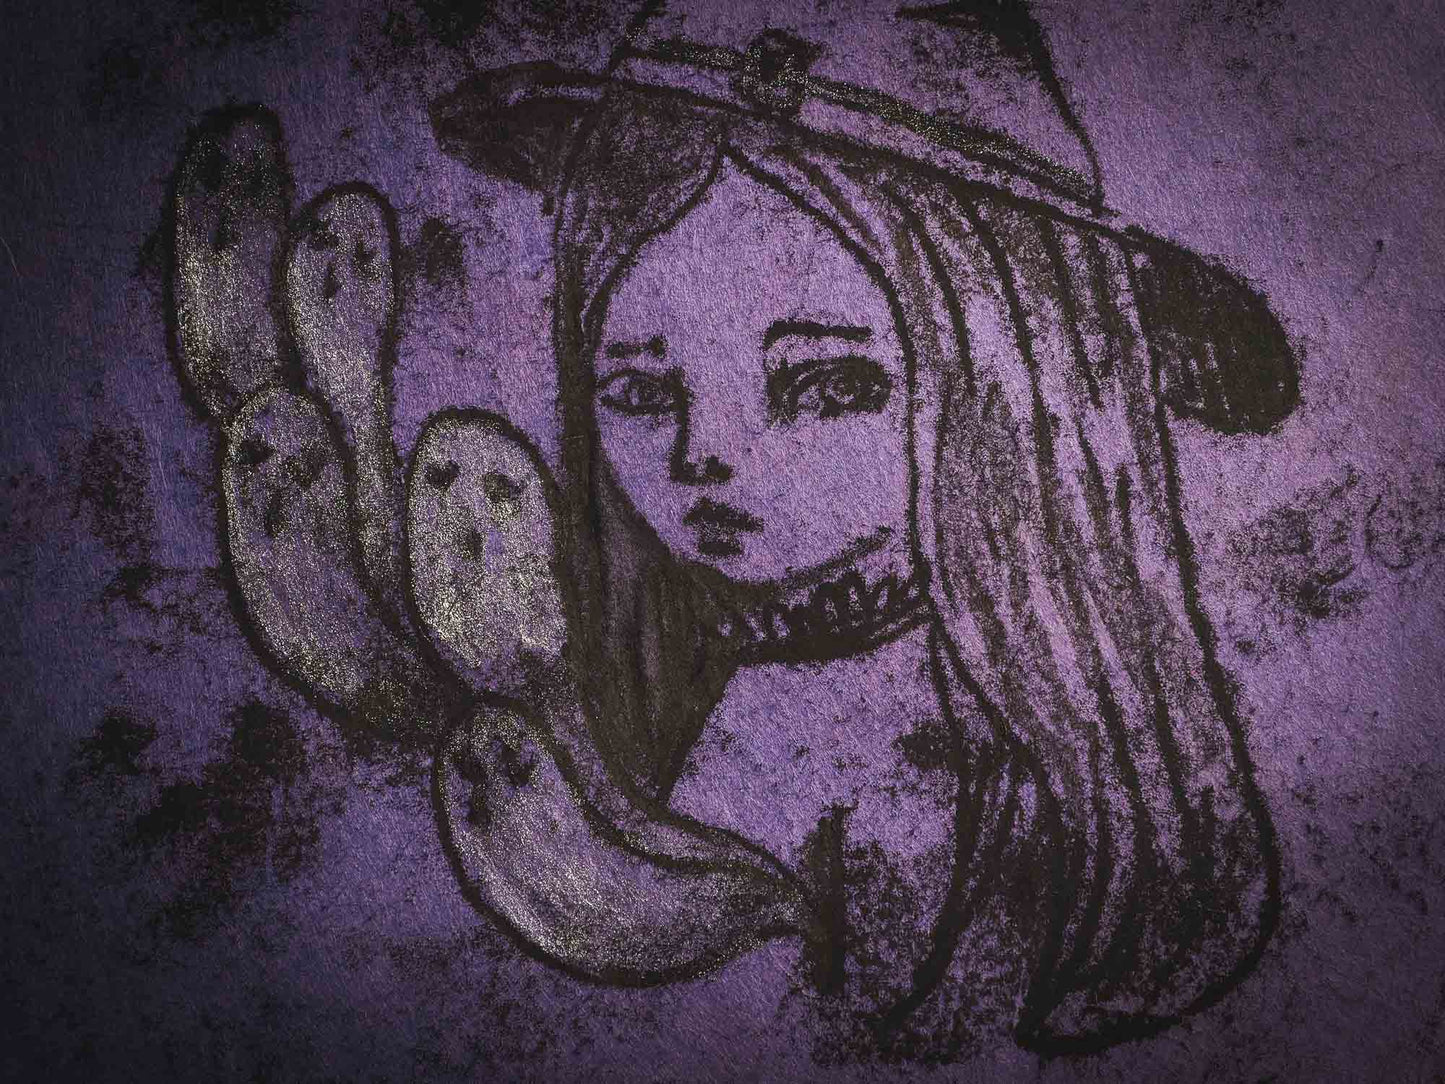 An original ink monoprint by Idania Salcido (Danita Art), this painting measures 7 x 7 inches on a very special purple toned paper. What better way to celebrate Halloween than with Witches? I loved this inked monoprint! She is traveling with her ghosts, ready for an amazing night of trick-or-treat.